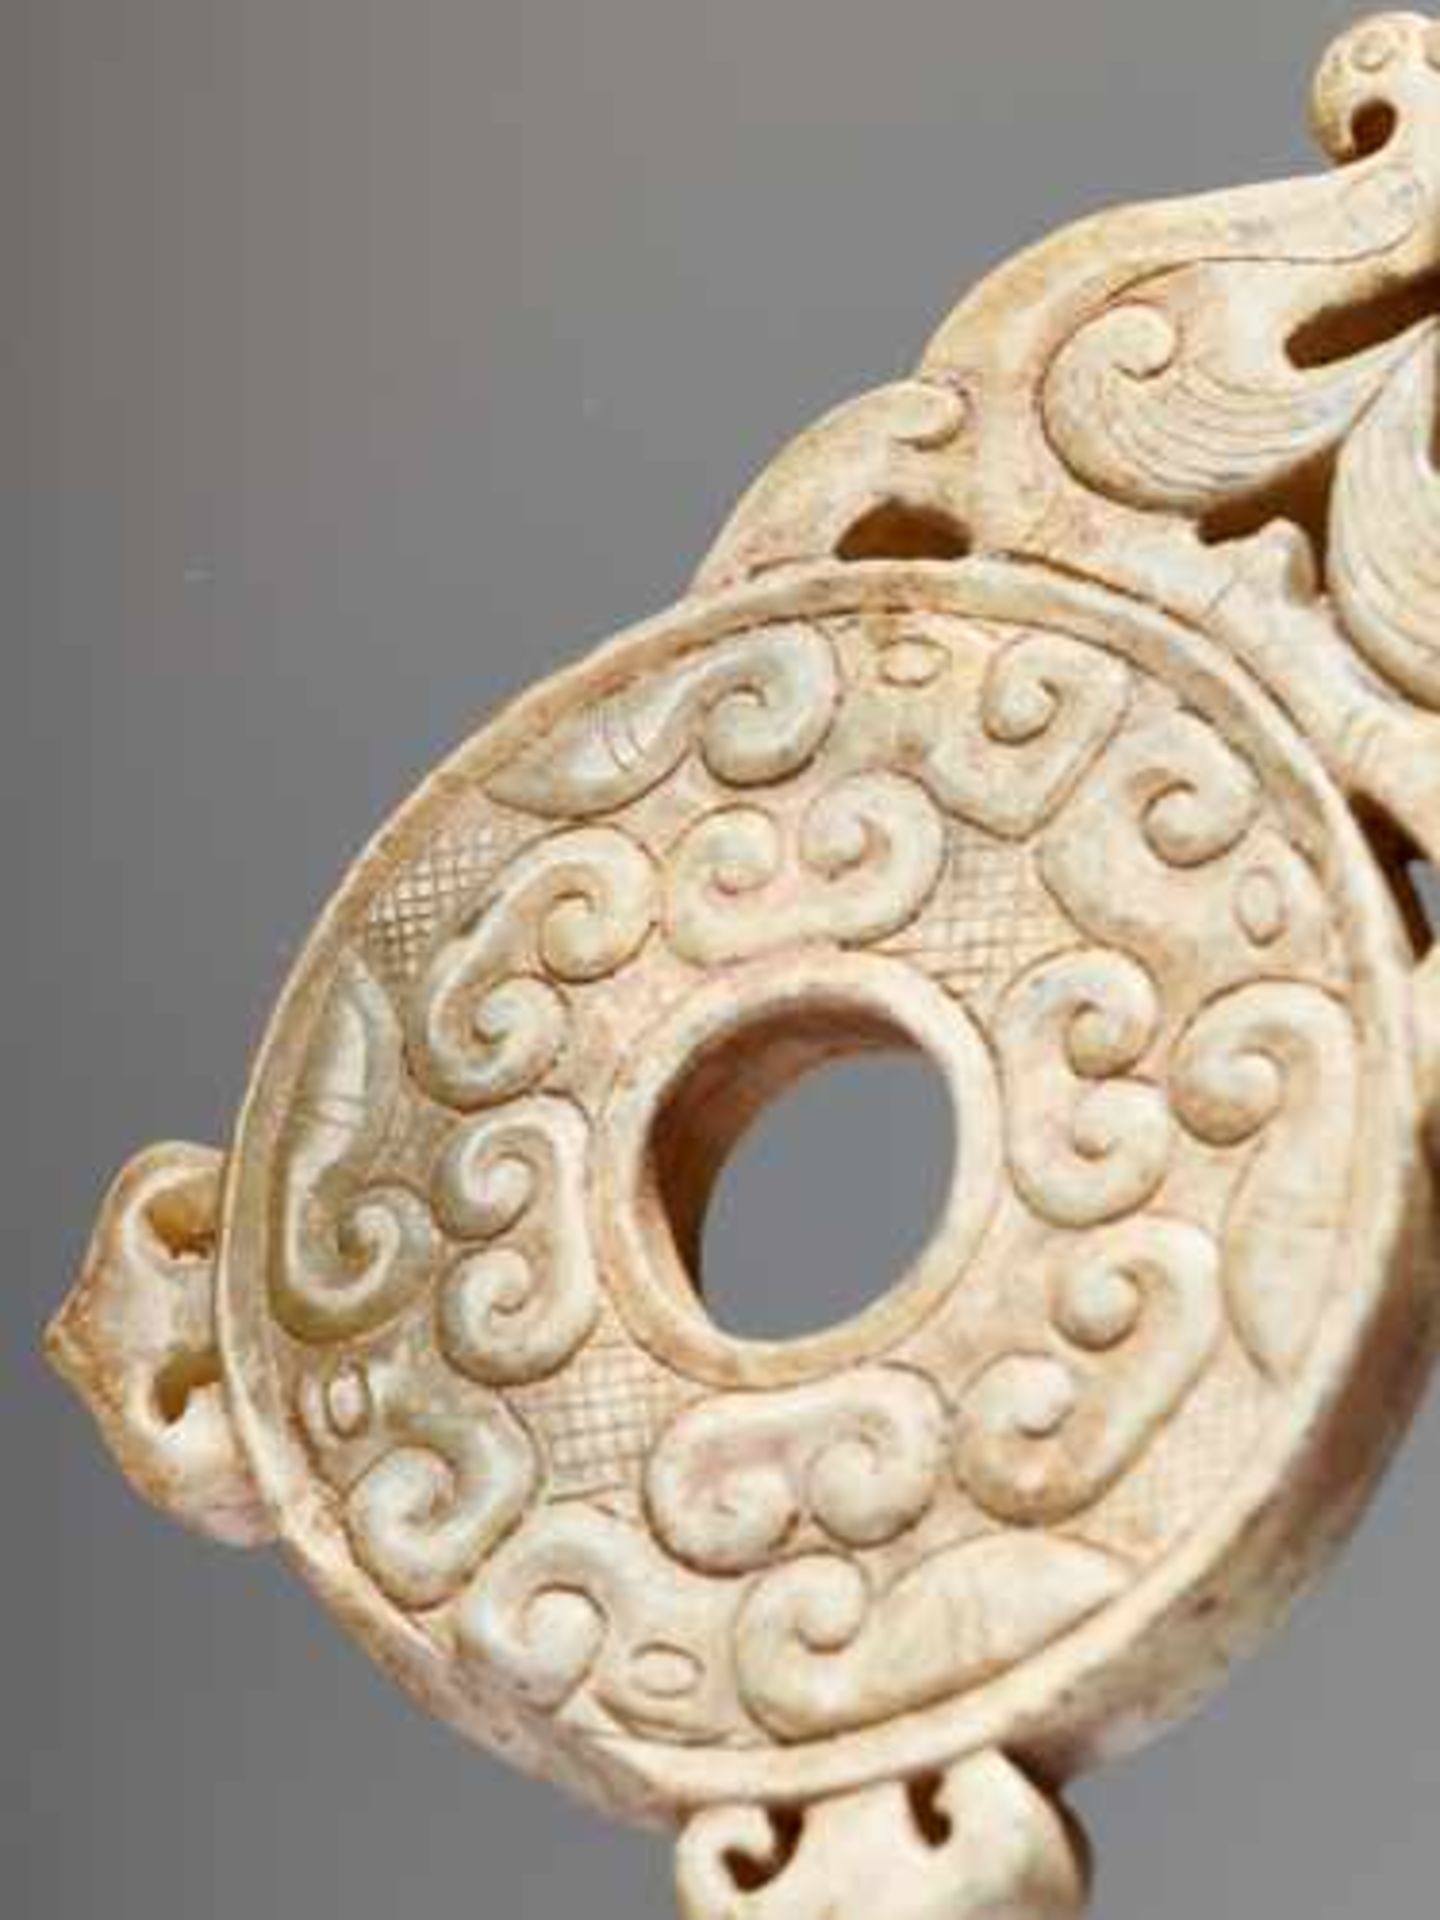 AN ATTRACTIVE SMALL DISC ORNAMENT EMBELLISHED WITH OPENWORK PHOENIXES ON TOP Jade, China. Eastern - Image 3 of 6